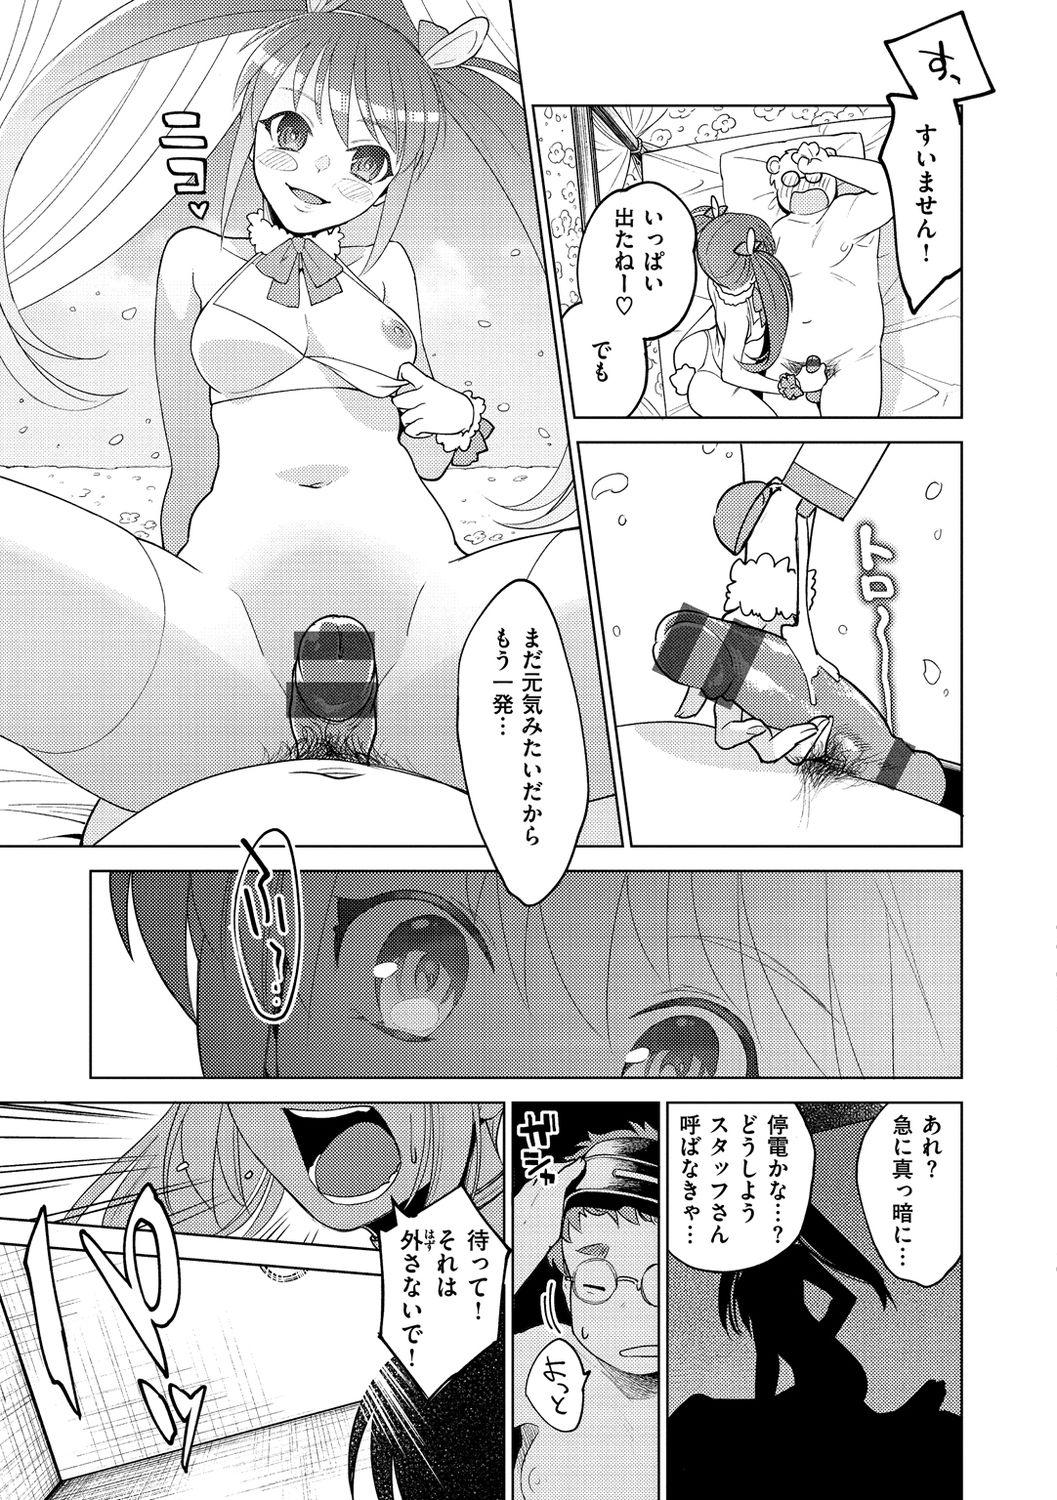 Asses DREAM ni Kogarete - Longing For a Dream Gaygroup - Page 9